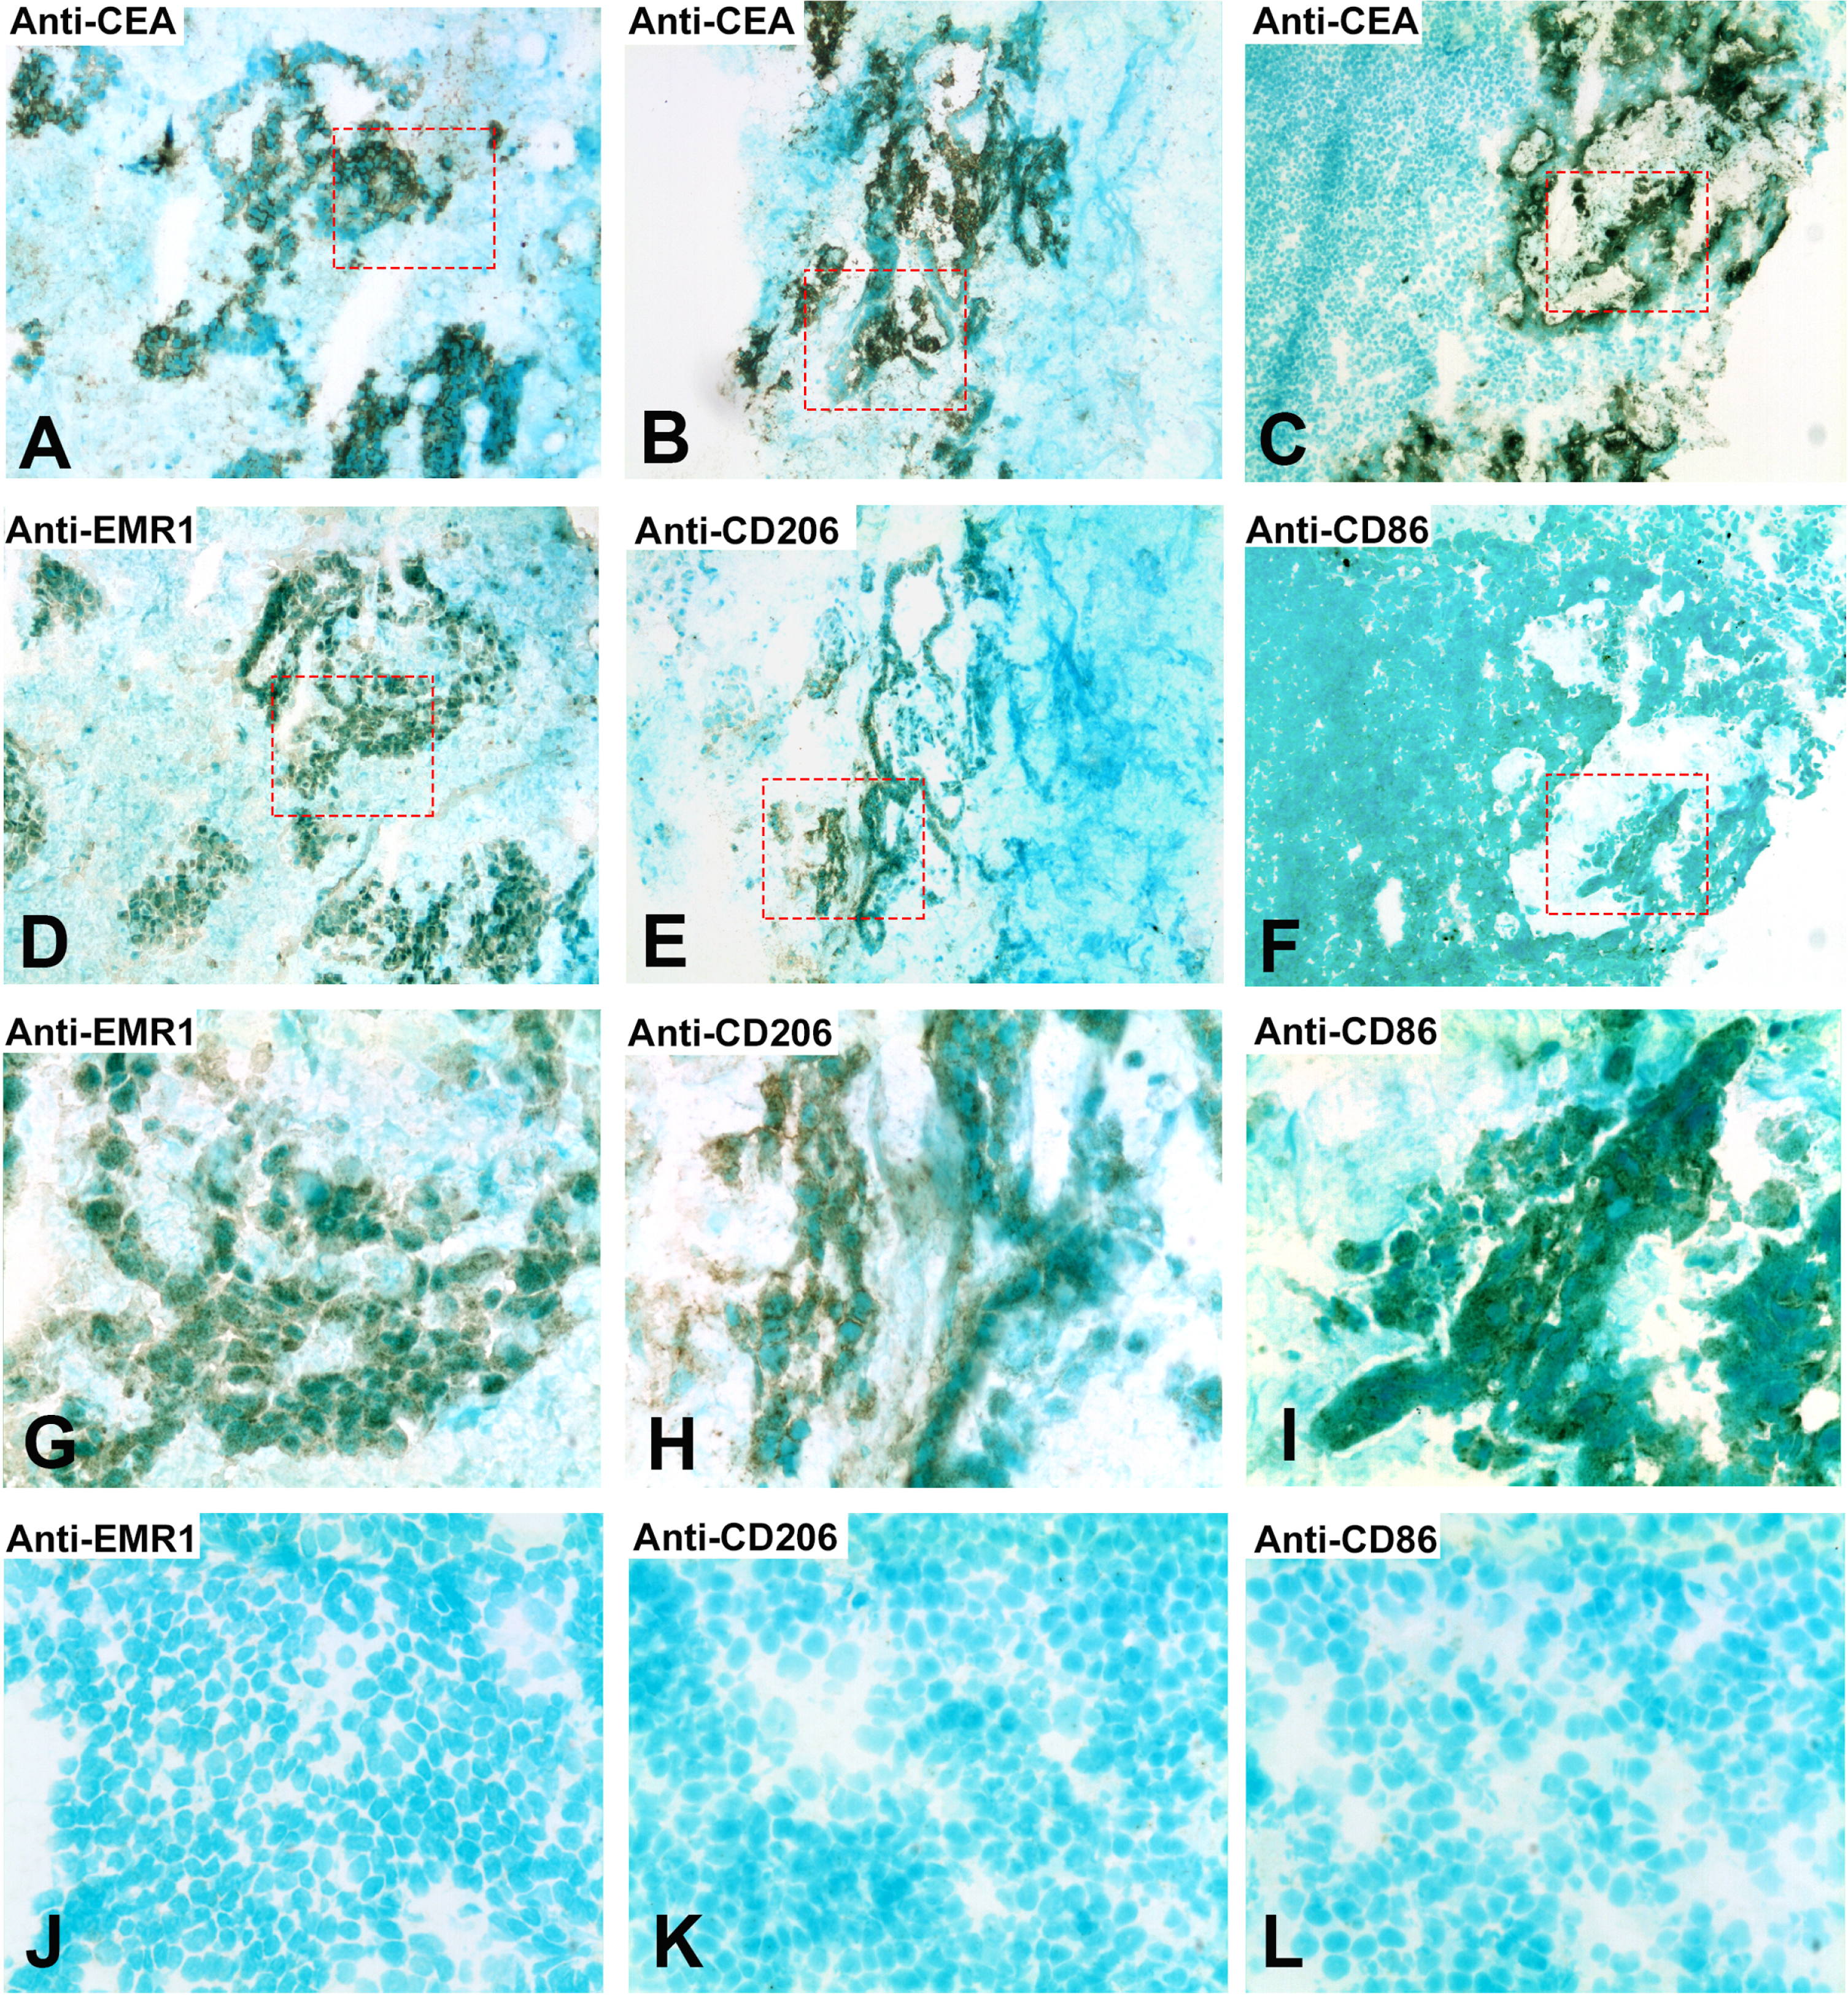 Immunoperoxidase staining of tissue sections of a CC lymph node metastasis. (A), (B), (C) Anti-CEA staining of an H&E (+) lymph node from a CC patient, original magnification 100×. (D) Anti-EMR1 staining of a consecutive section of (A), original magnification 100×. (E) Anti-CD206 staining of a consecutive section of (B), original magnification 100×. (F) Anti-CD86 staining of a consecutive section of (C), original magnification 100×. (G) Higher magnification of indicated area in (D), 400×. (H) Higher magnification of indicated area in (E), 400×. (I) Higher magnification of indicated area in (F), 400×. (J) Anti-EMR1 staining of an H&E(–) lymph node of a CC patient, 400x. (K) Anti-CD206 staining of an H&E(–) lymph node of a CC patient, 400x. (L) Anti-CD86 staining of an H&E(–) lymph node of a CC patient, 400x. Positive cells stained brown to black. Methyl-green was used for counterstaining.